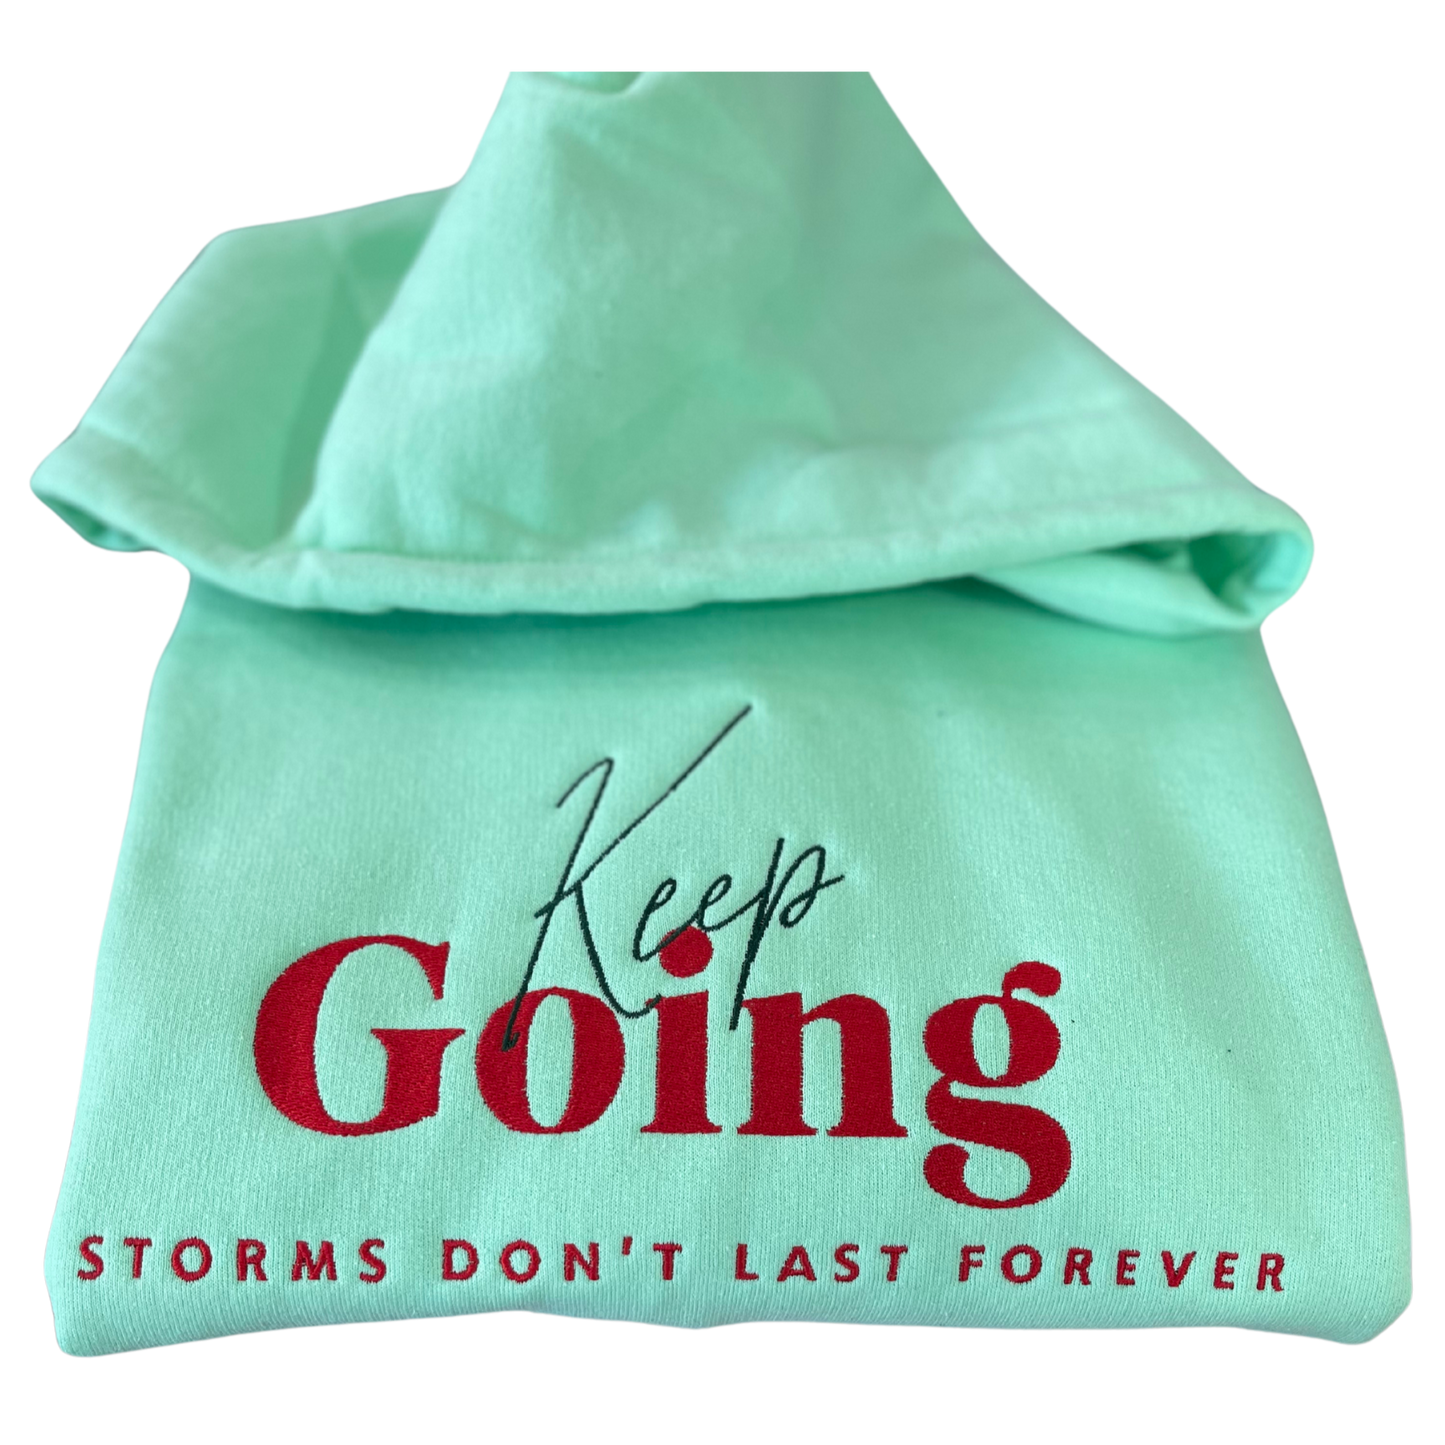 Keep Going - Storms Don't Last Forever